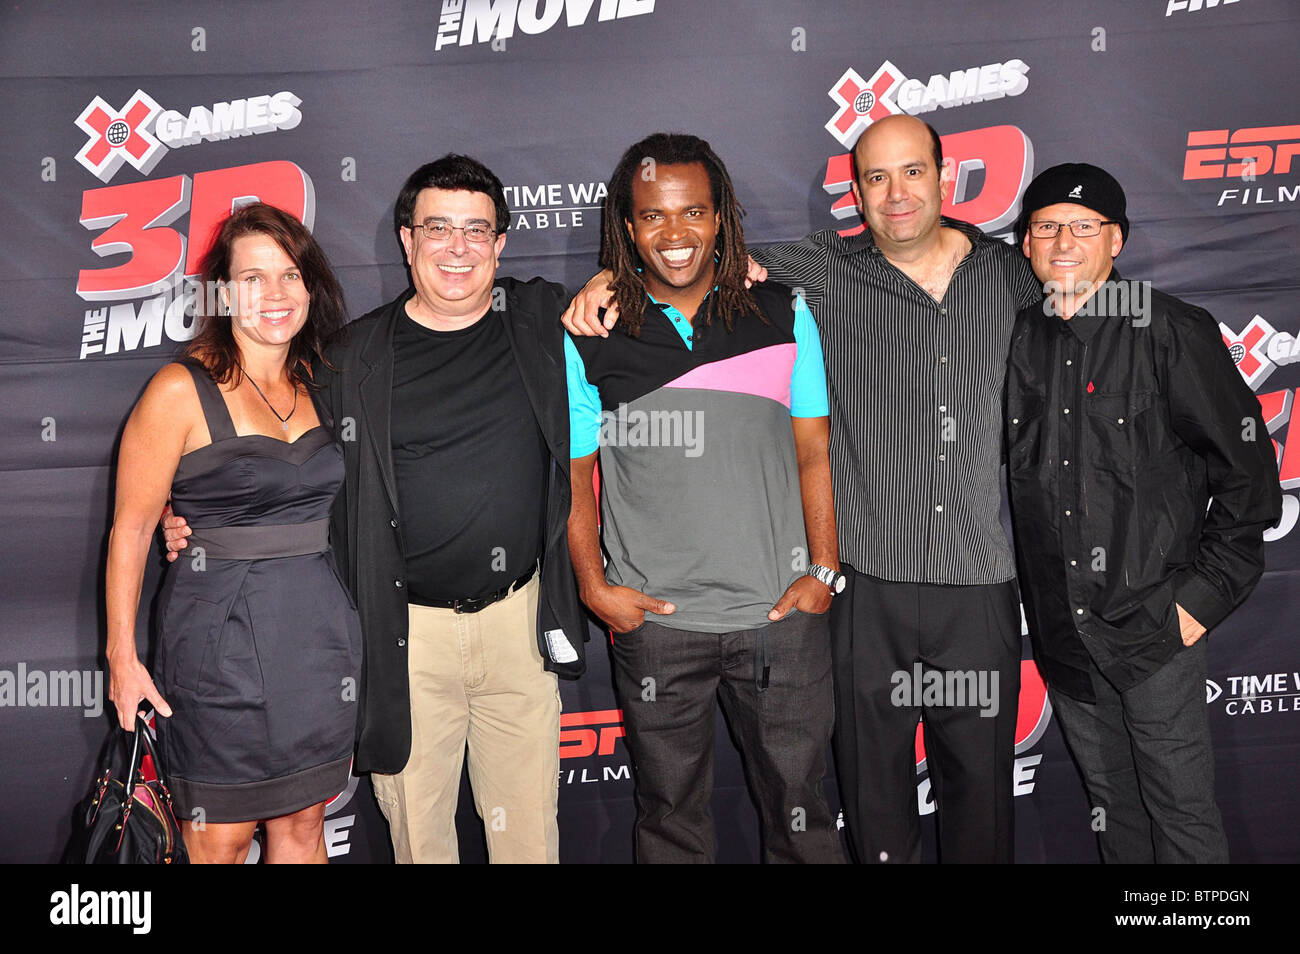 X-Games 3D THE MOVIE Premiere Stock Photo